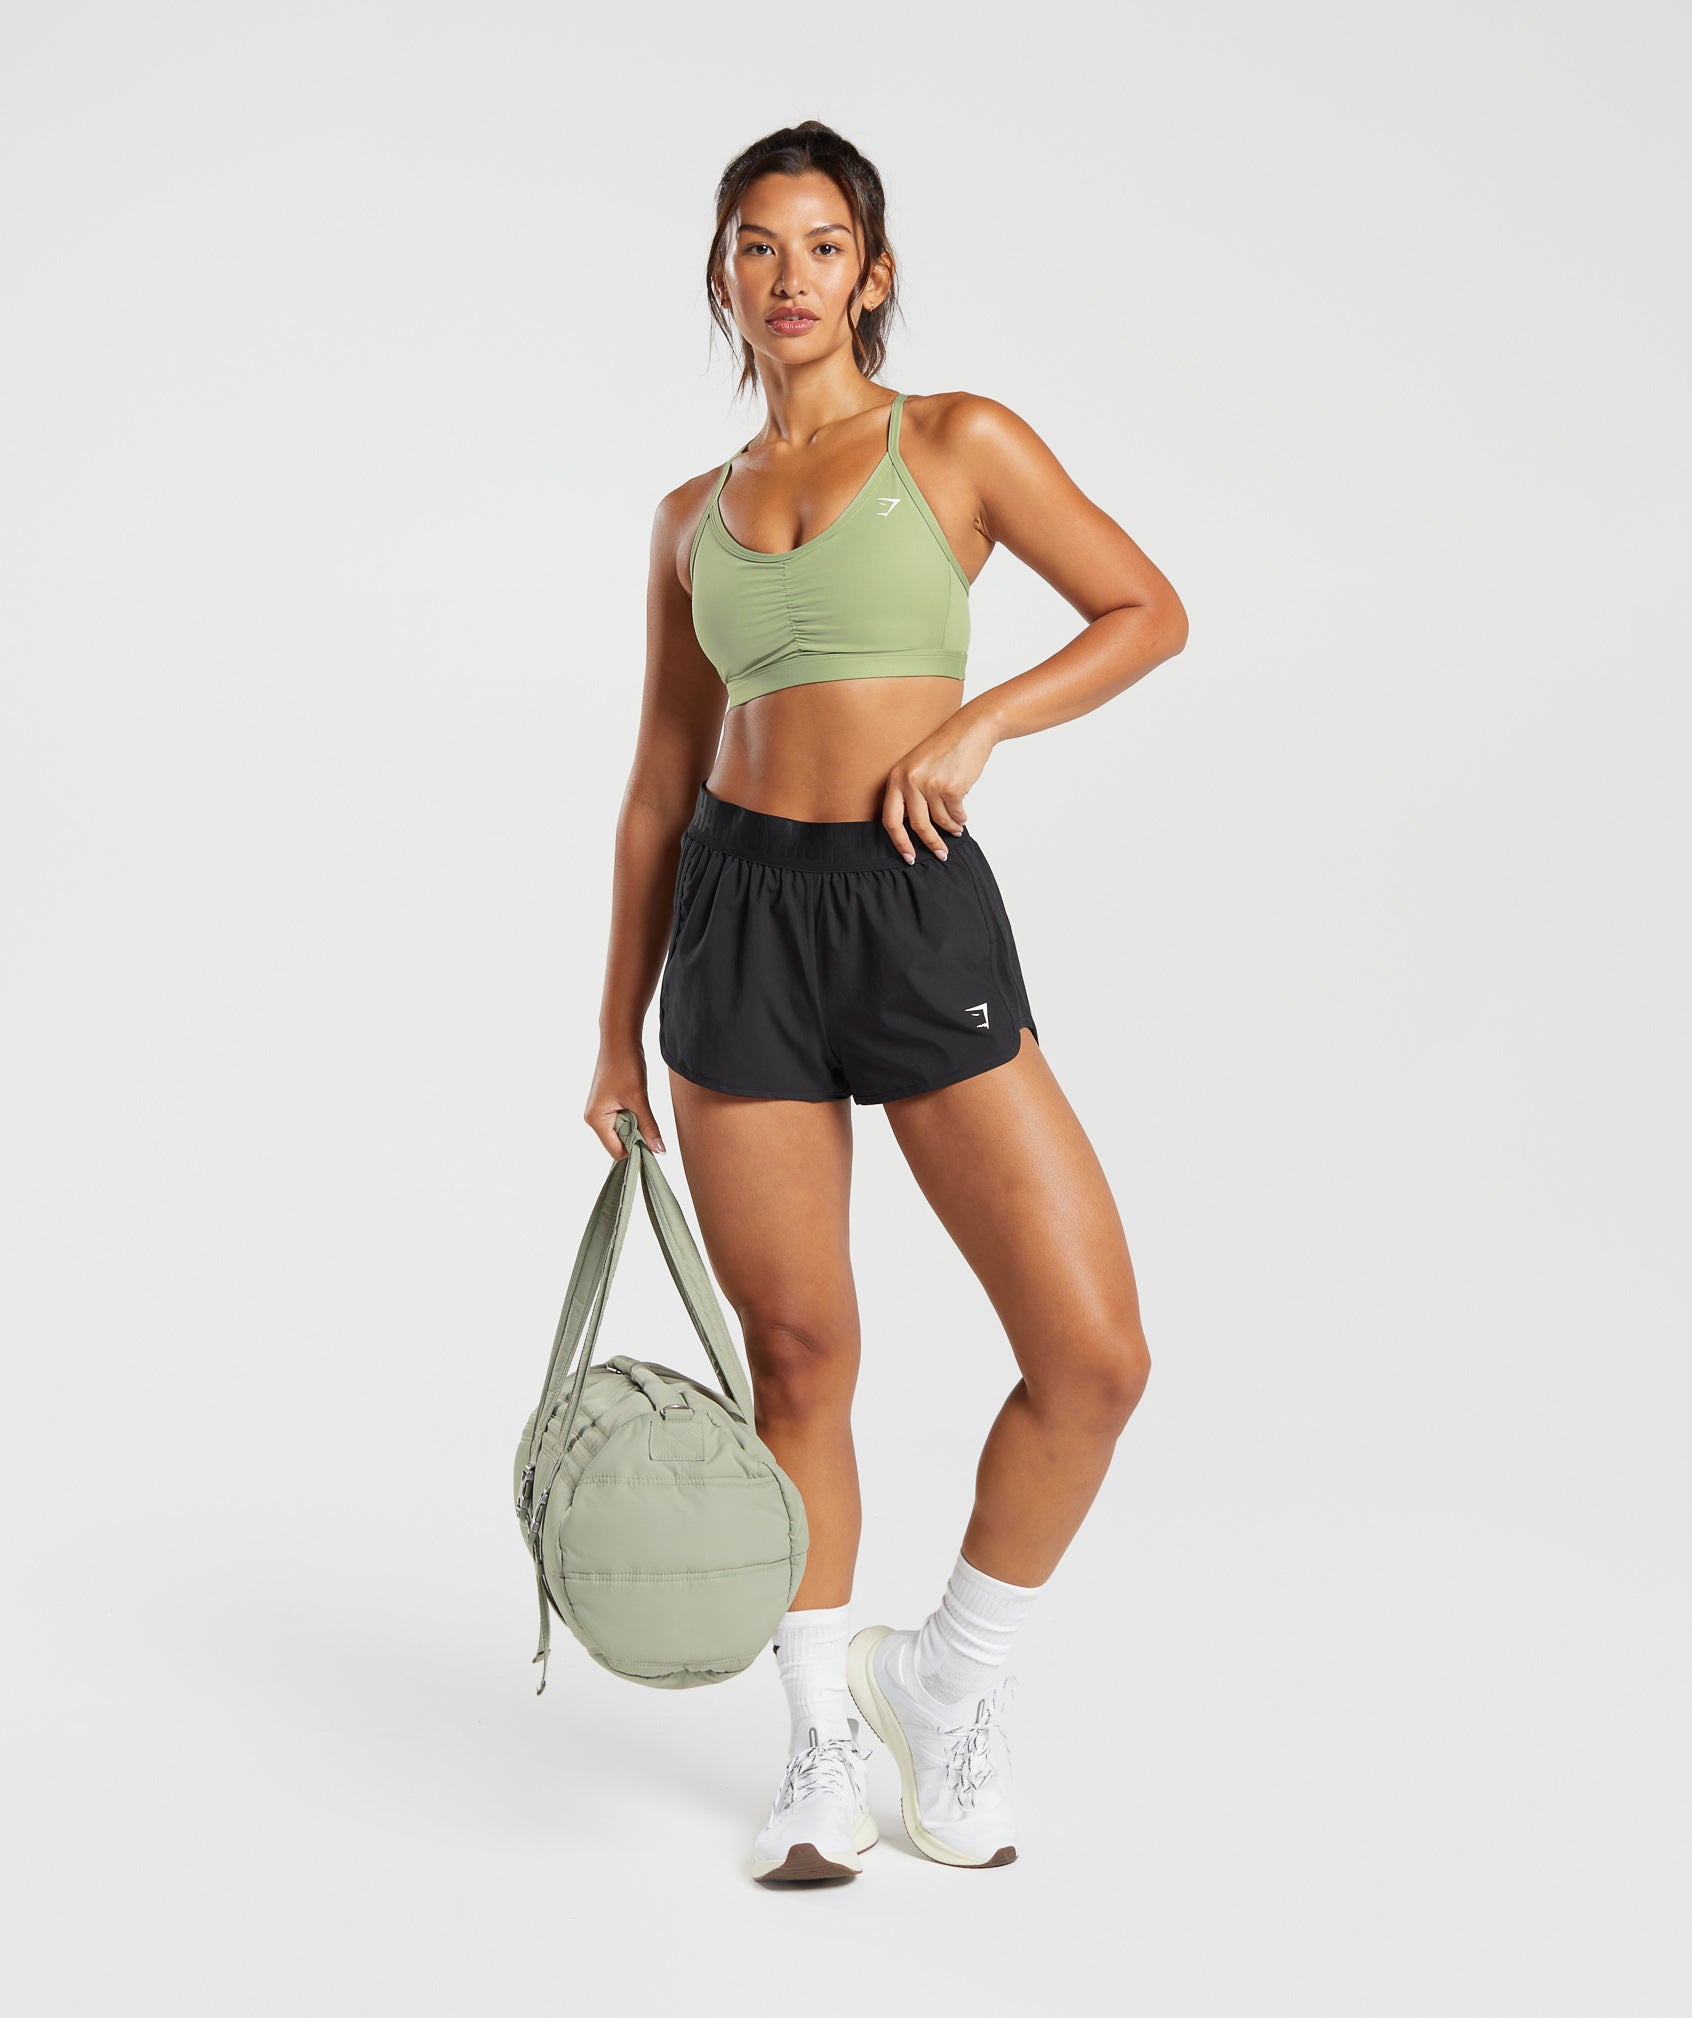 Ruched Sports Bra in Light Sage Green - view 5